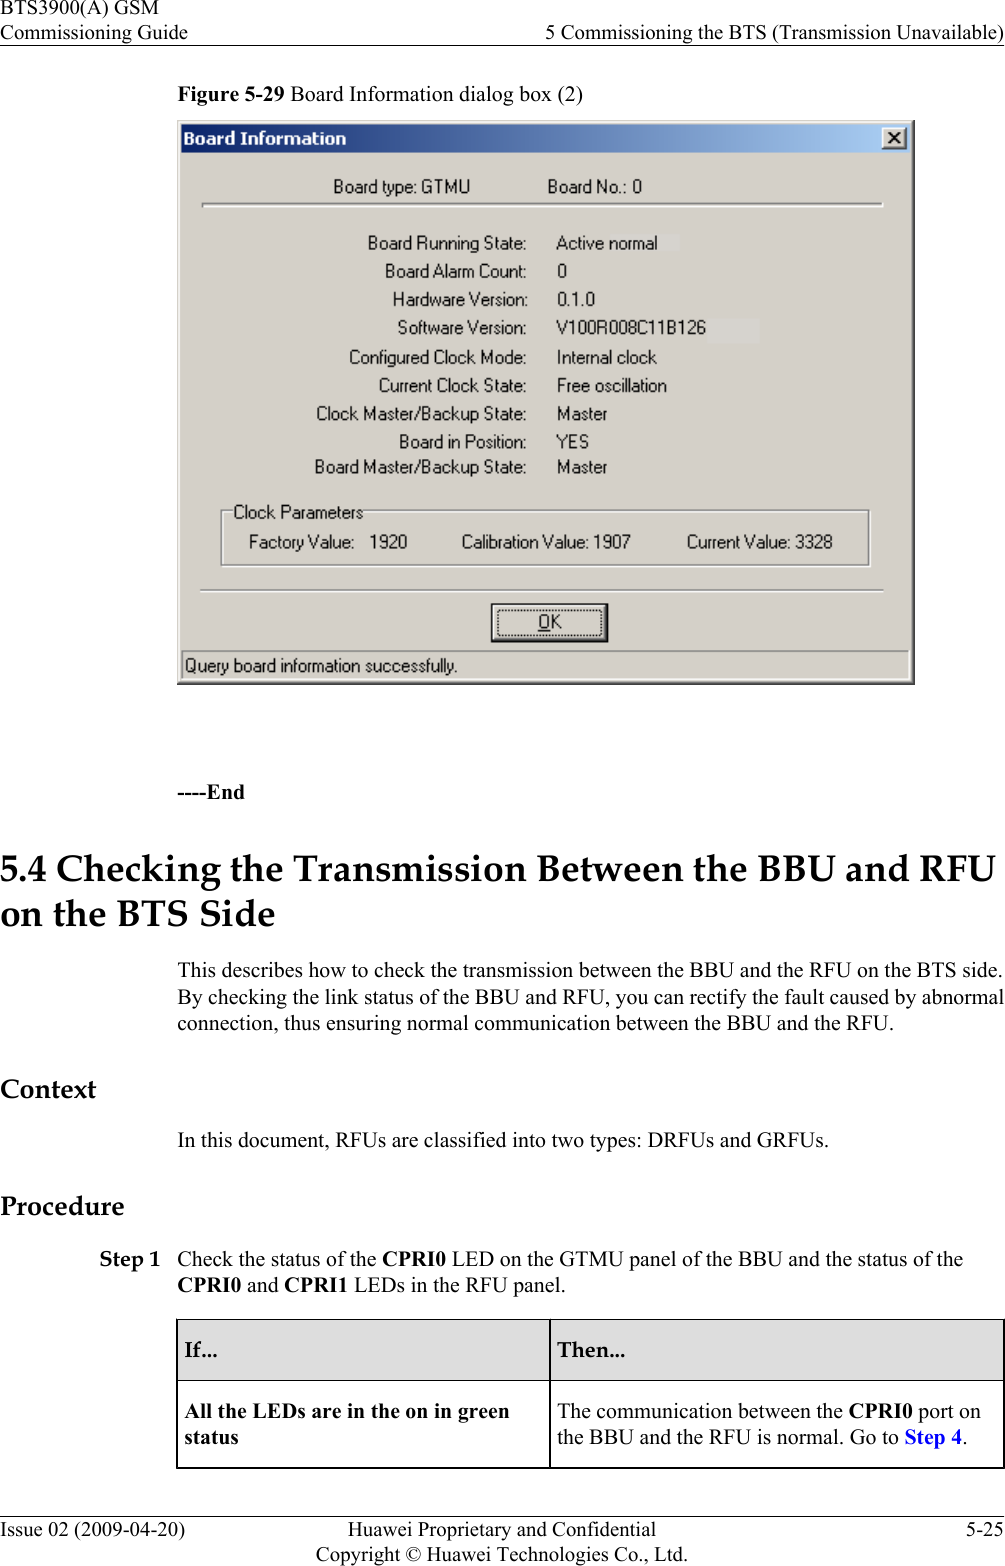 Figure 5-29 Board Information dialog box (2) ----End5.4 Checking the Transmission Between the BBU and RFUon the BTS SideThis describes how to check the transmission between the BBU and the RFU on the BTS side.By checking the link status of the BBU and RFU, you can rectify the fault caused by abnormalconnection, thus ensuring normal communication between the BBU and the RFU.ContextIn this document, RFUs are classified into two types: DRFUs and GRFUs.ProcedureStep 1 Check the status of the CPRI0 LED on the GTMU panel of the BBU and the status of theCPRI0 and CPRI1 LEDs in the RFU panel.If... Then...All the LEDs are in the on in greenstatusThe communication between the CPRI0 port onthe BBU and the RFU is normal. Go to Step 4.BTS3900(A) GSMCommissioning Guide 5 Commissioning the BTS (Transmission Unavailable)Issue 02 (2009-04-20) Huawei Proprietary and ConfidentialCopyright © Huawei Technologies Co., Ltd.5-25